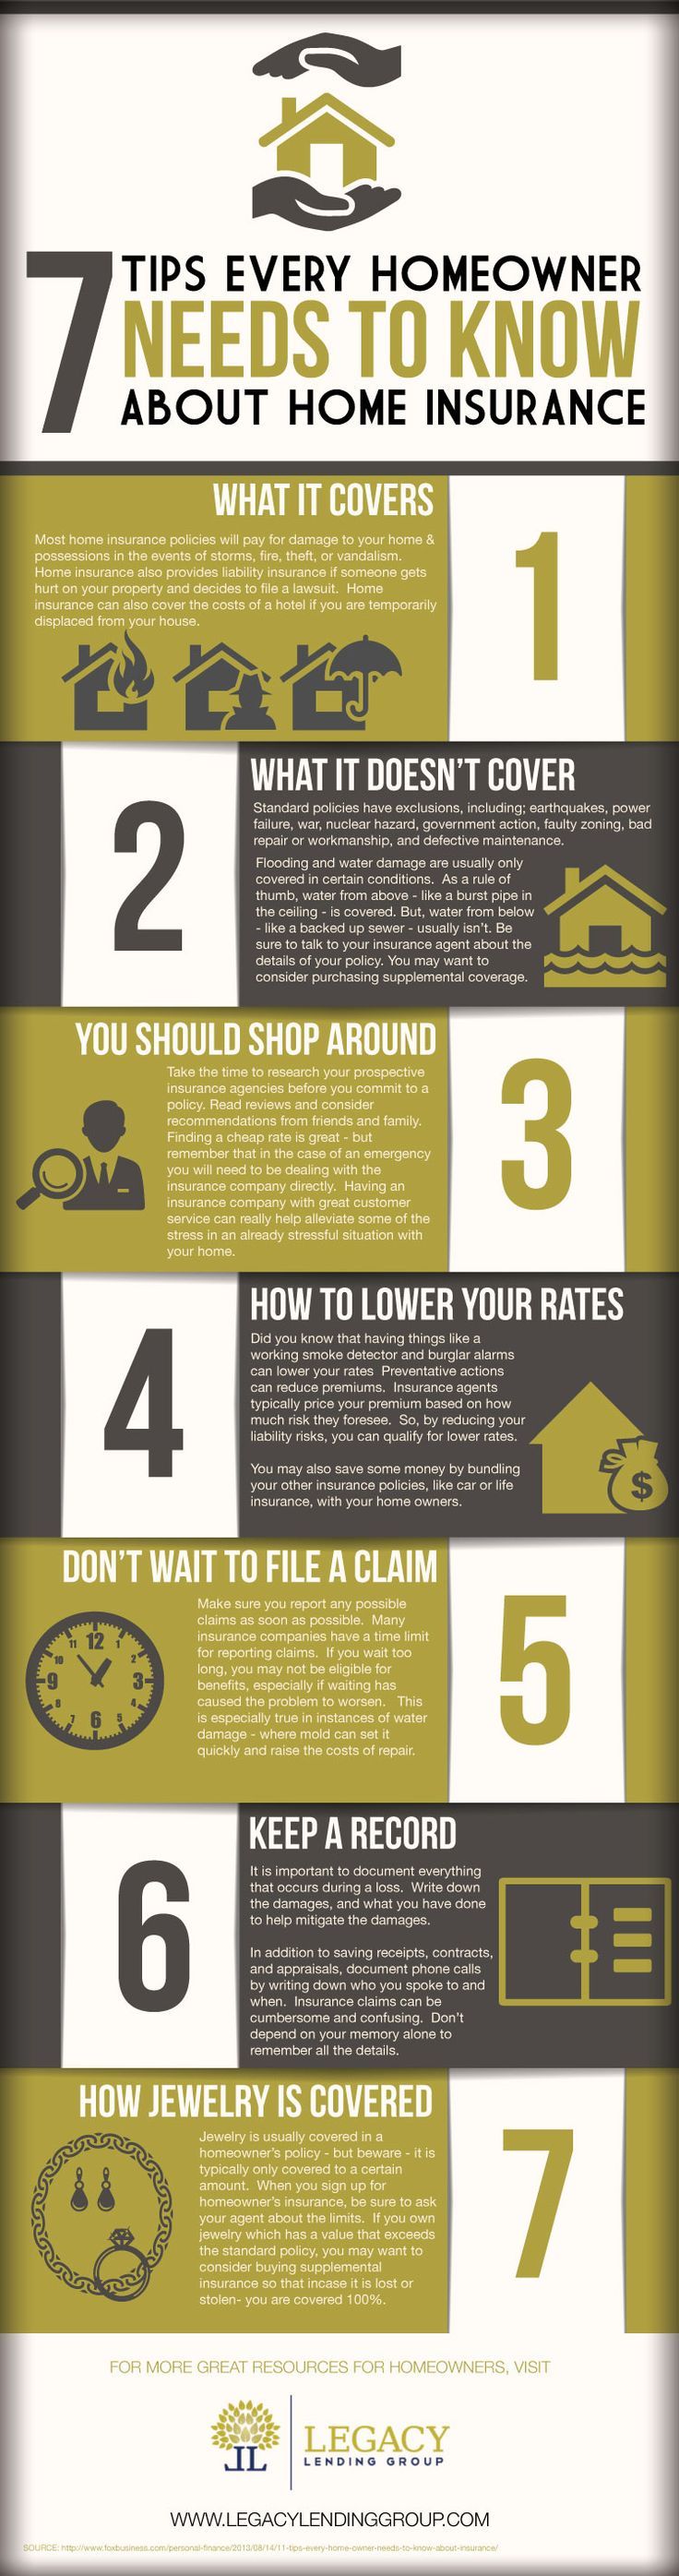 Homeowner Tips About Home Insurance by Legacy Lending Group